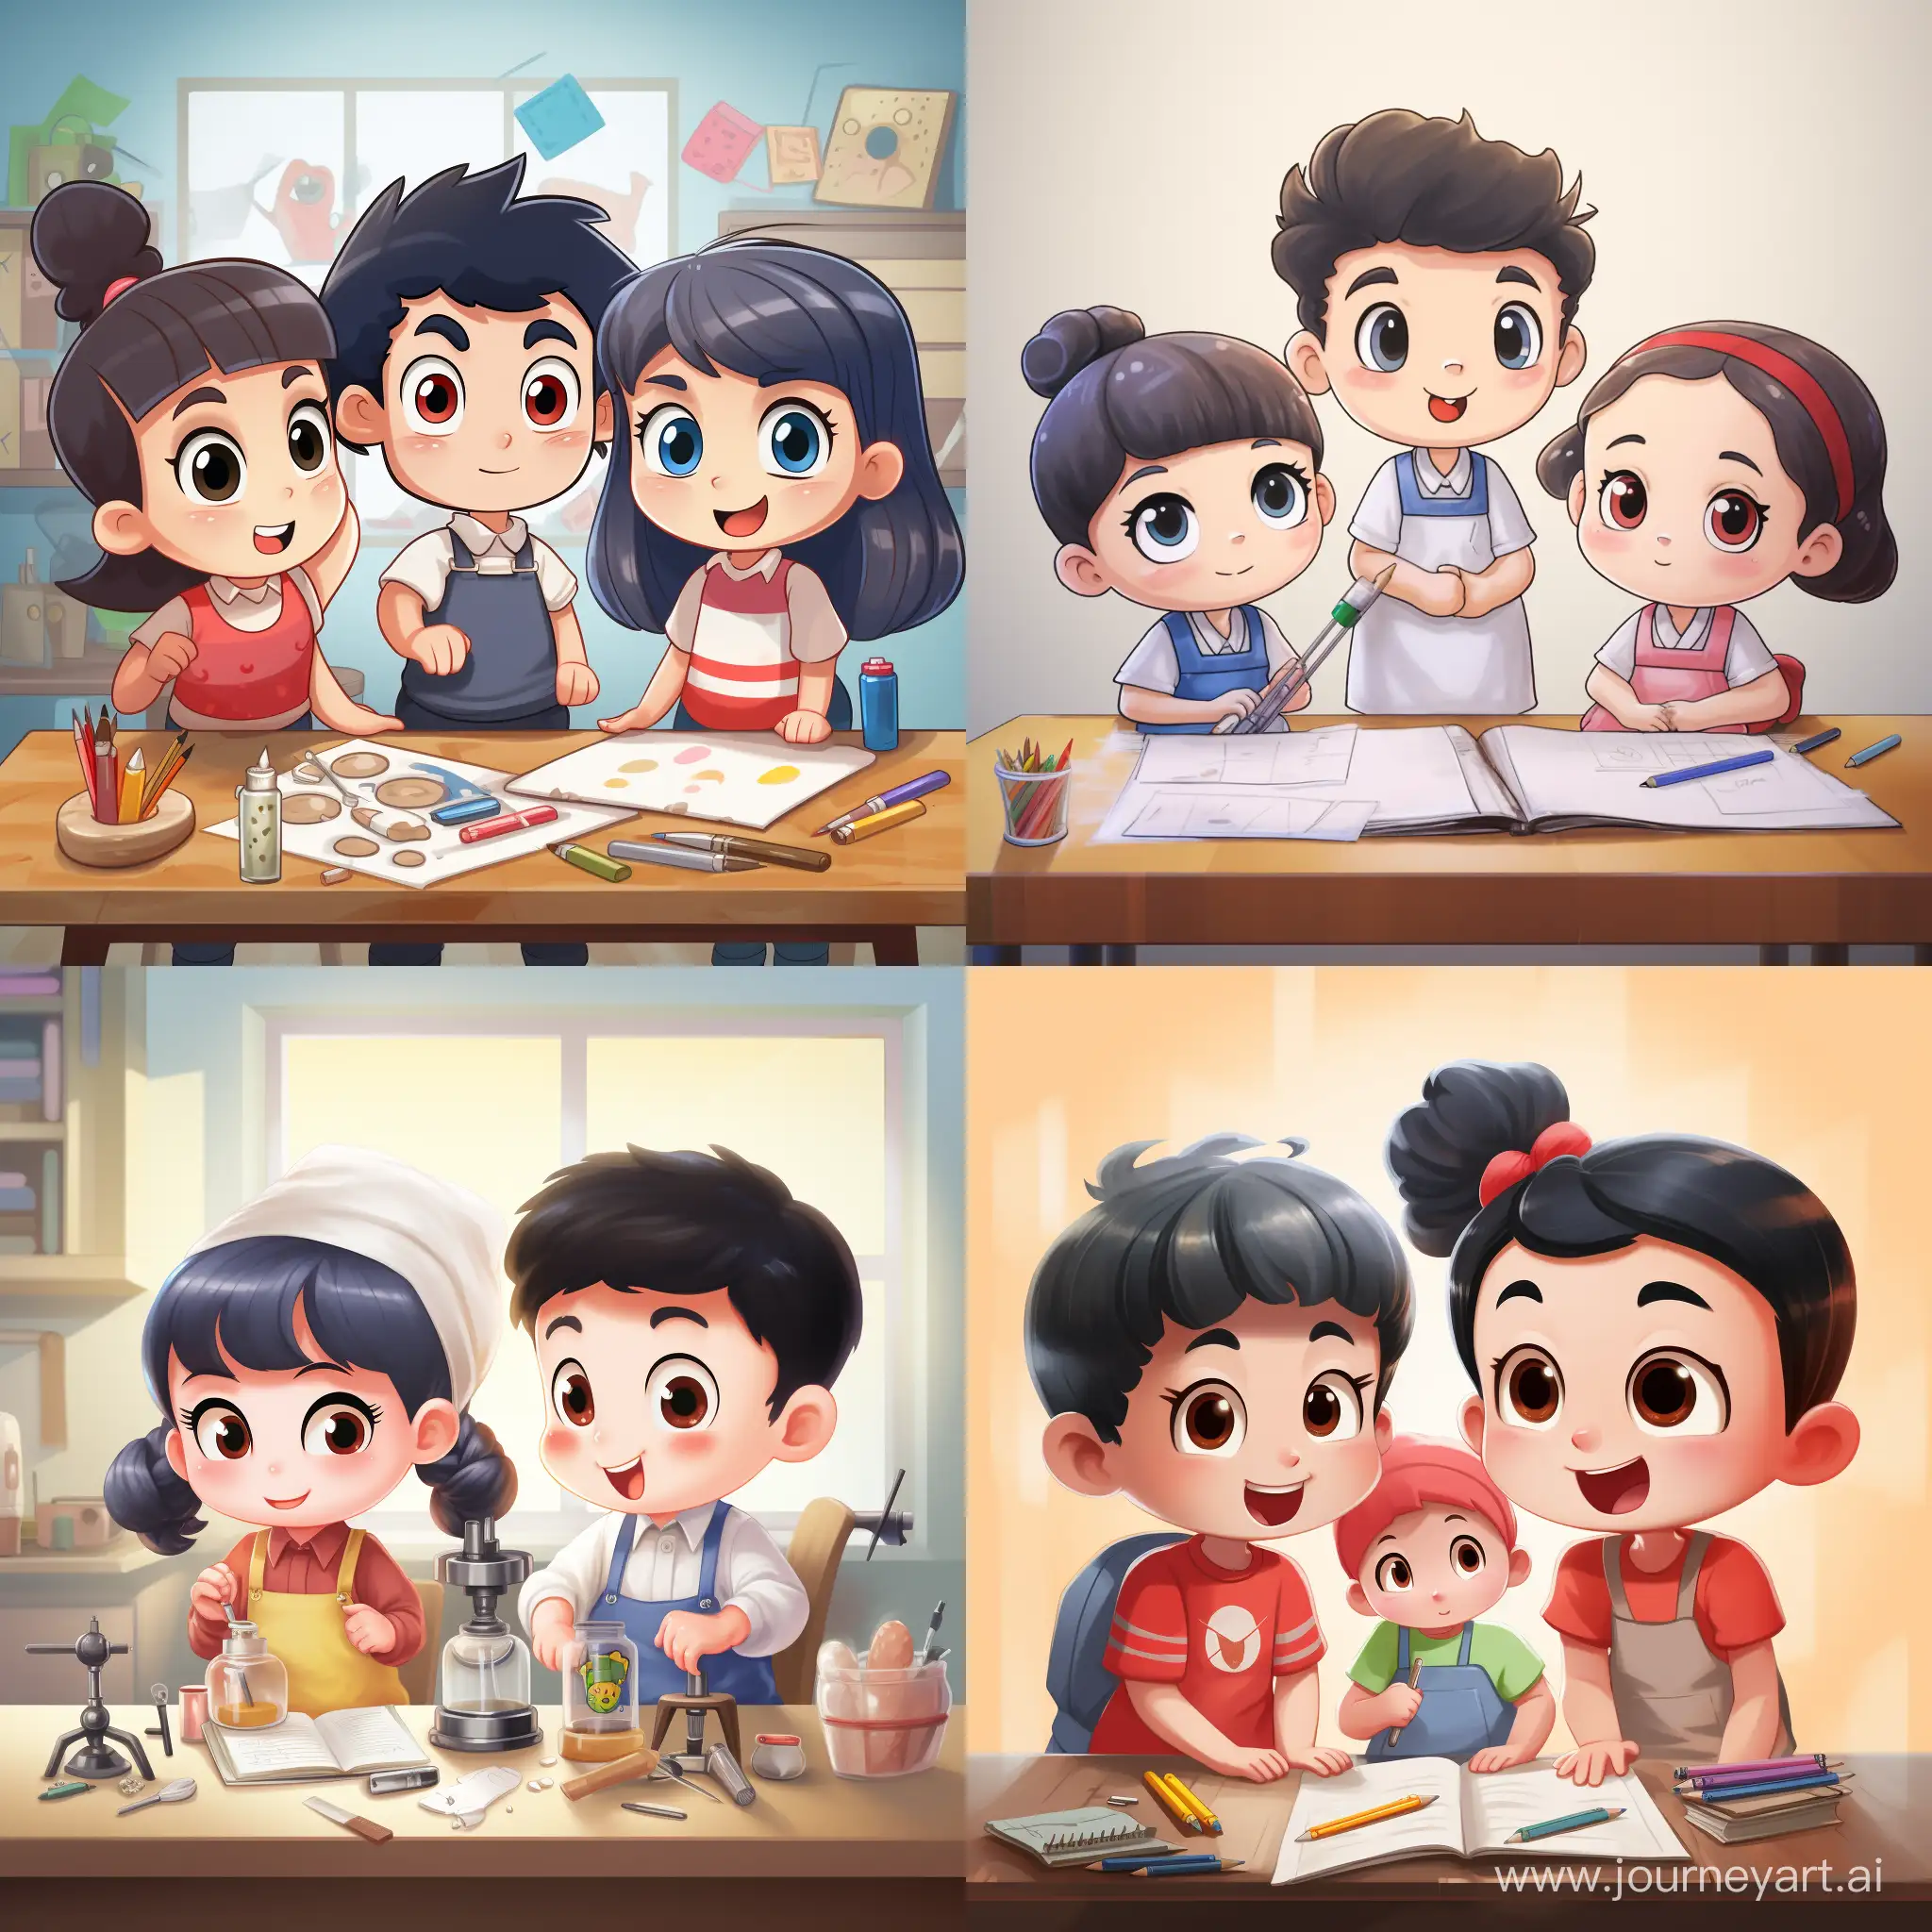 Help me to design three anime kids cartoon image, two female and one male, they are doing an experiment.they are very smart!Same as Crayon Shin-chan.